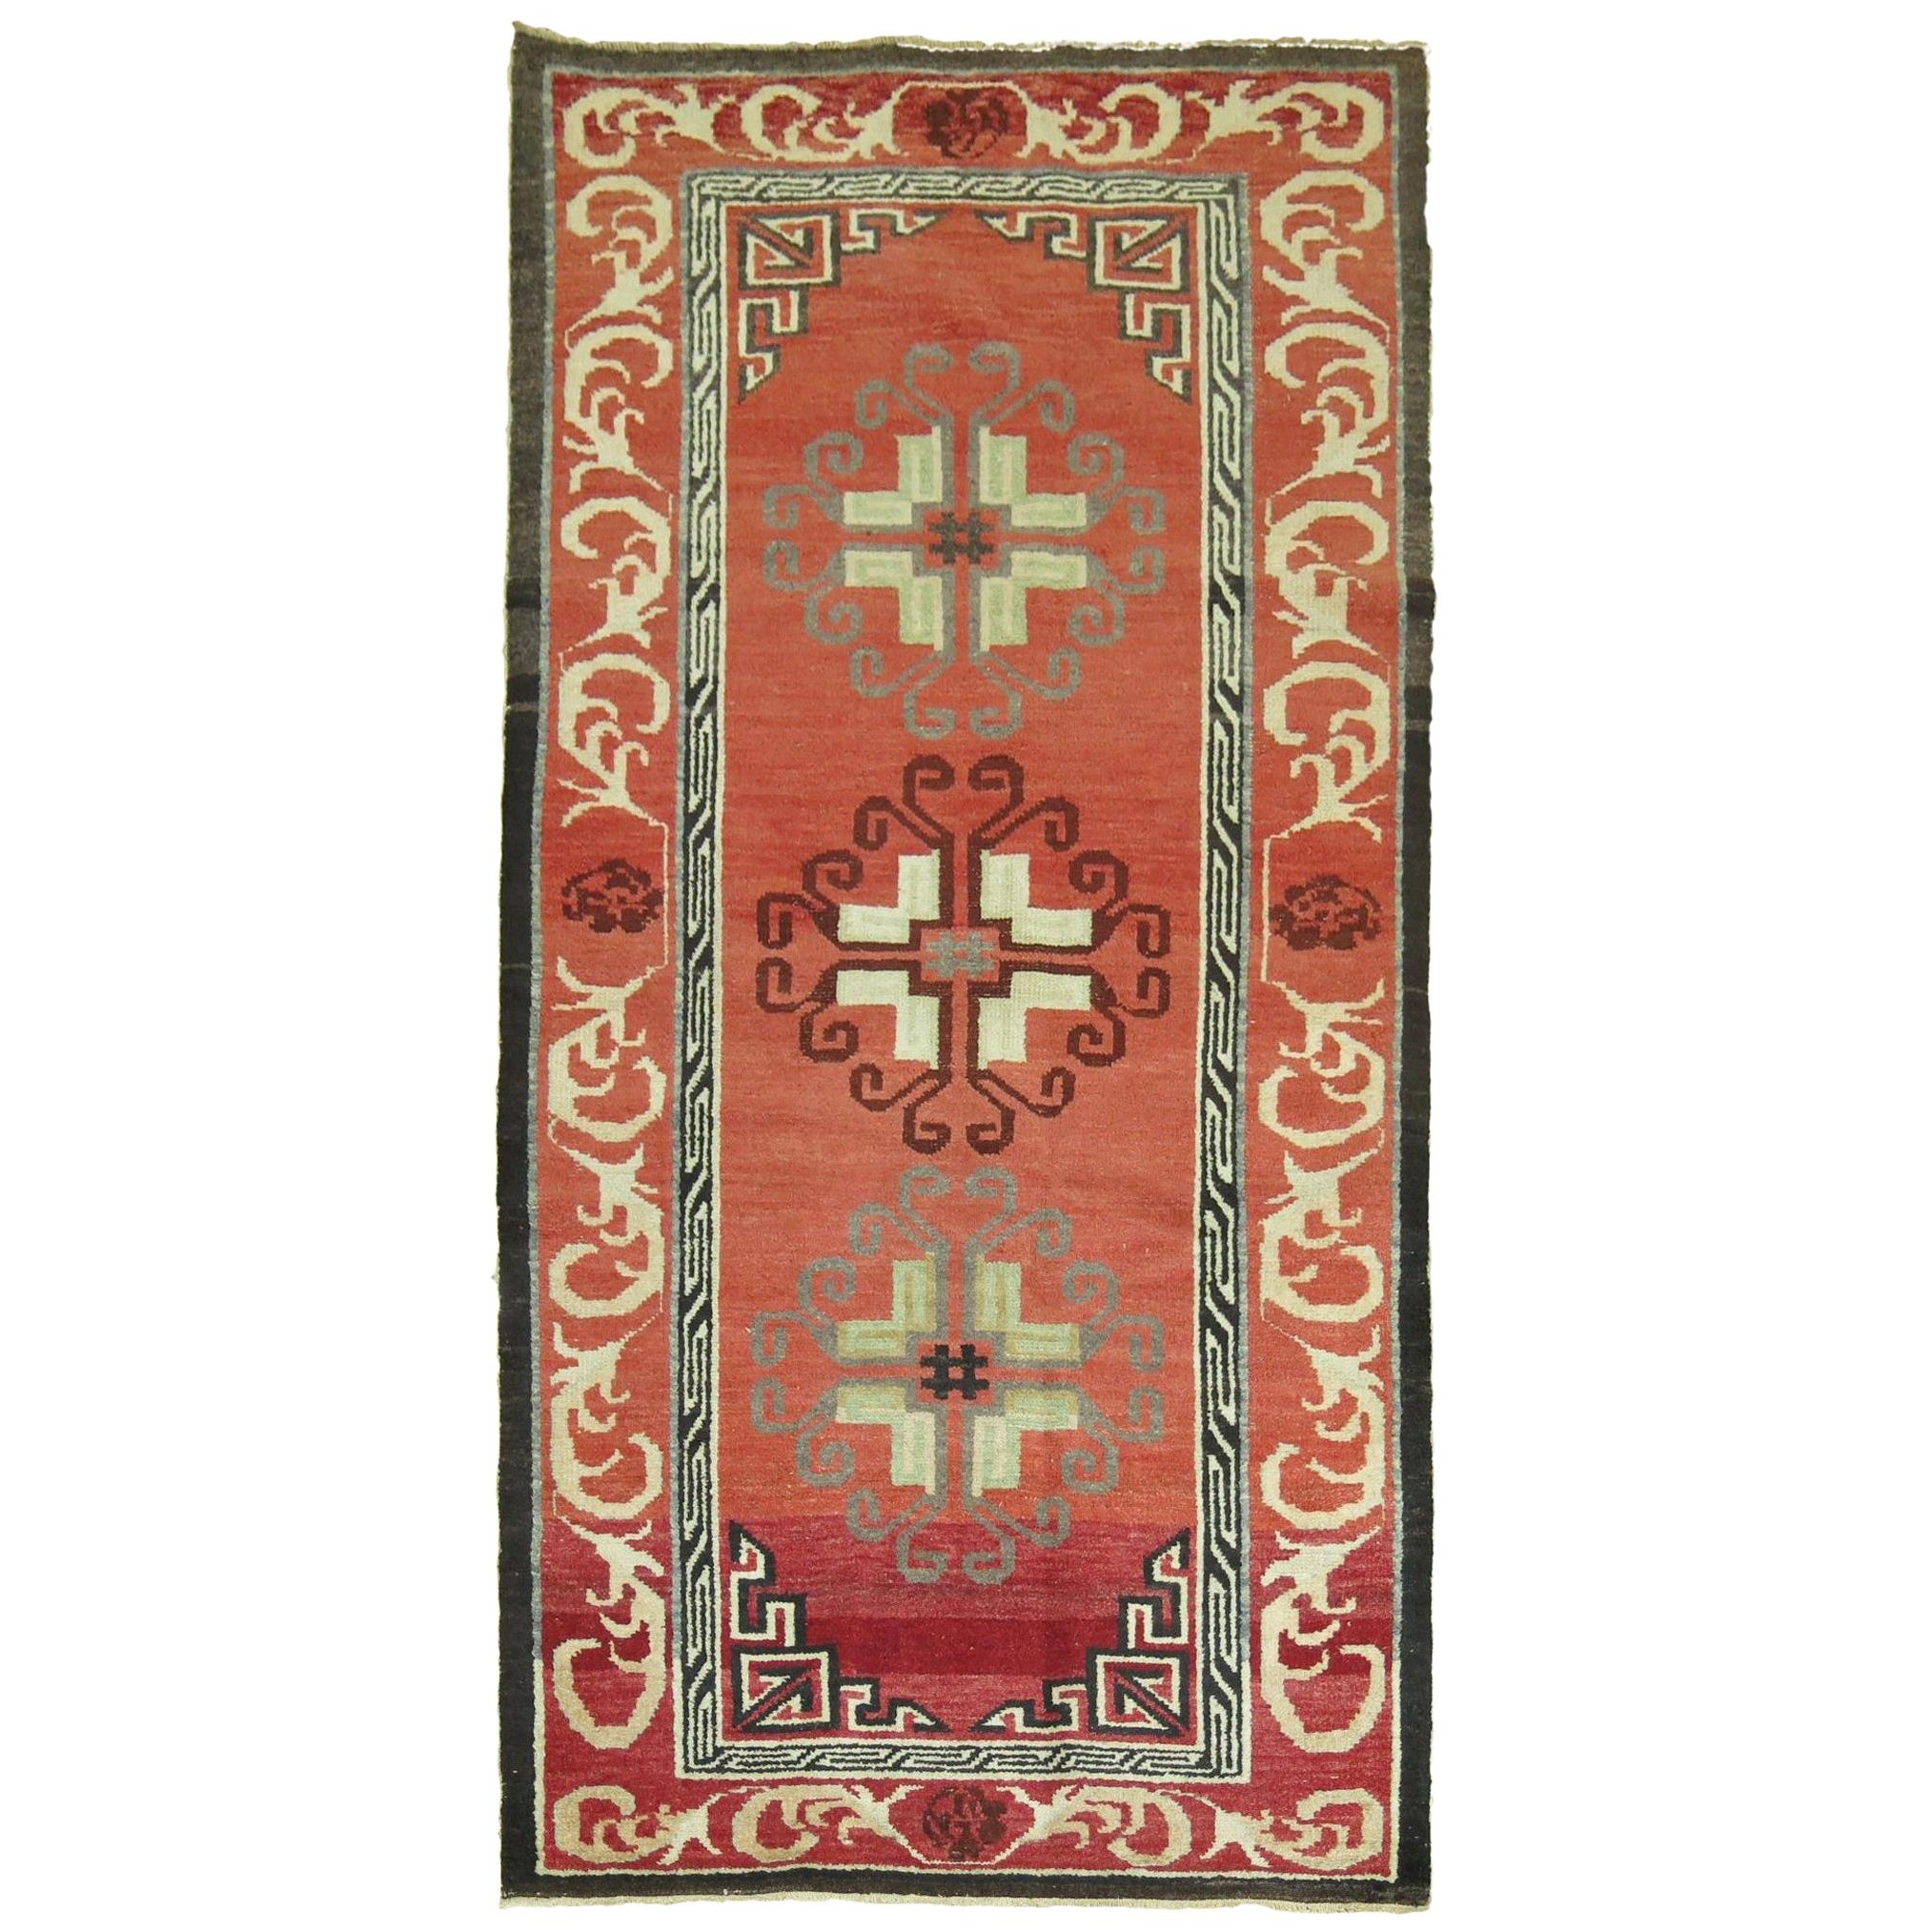 Red Vintage Turkish Rug Inspired by 19th Century Asian Khotan Rugs